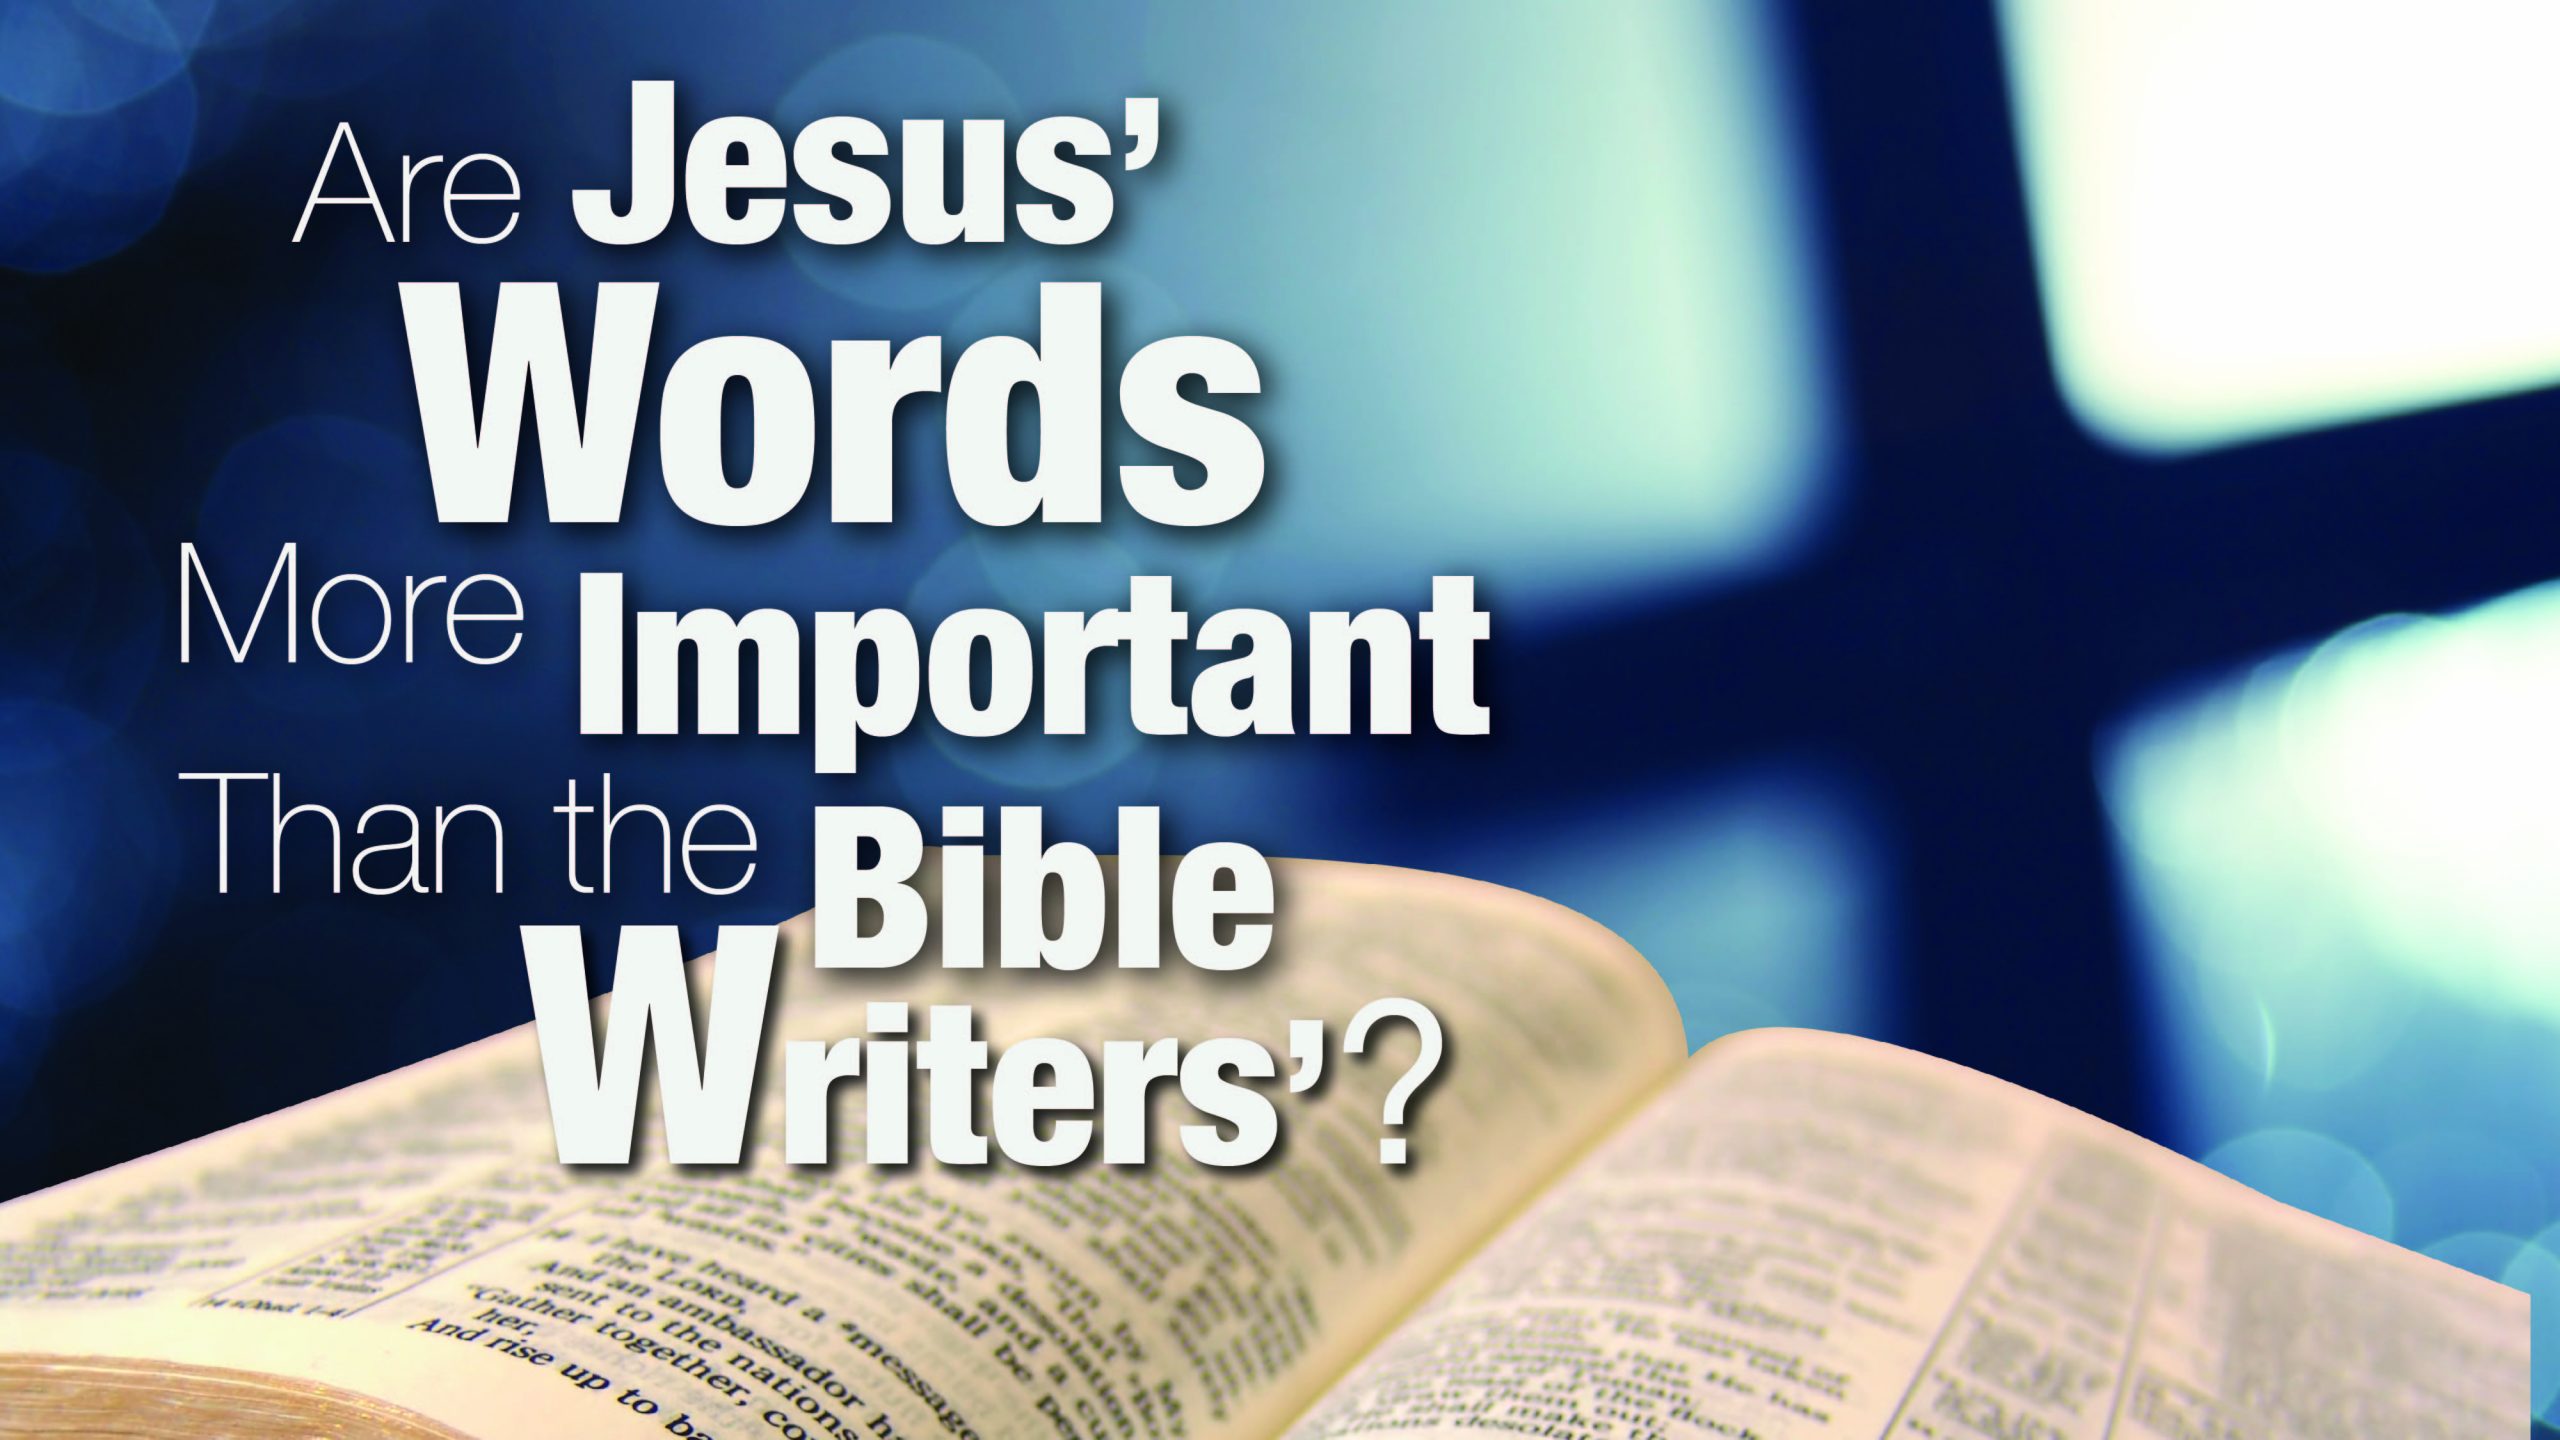 Are Jesus' Words More Important Than the Bible Writers'?